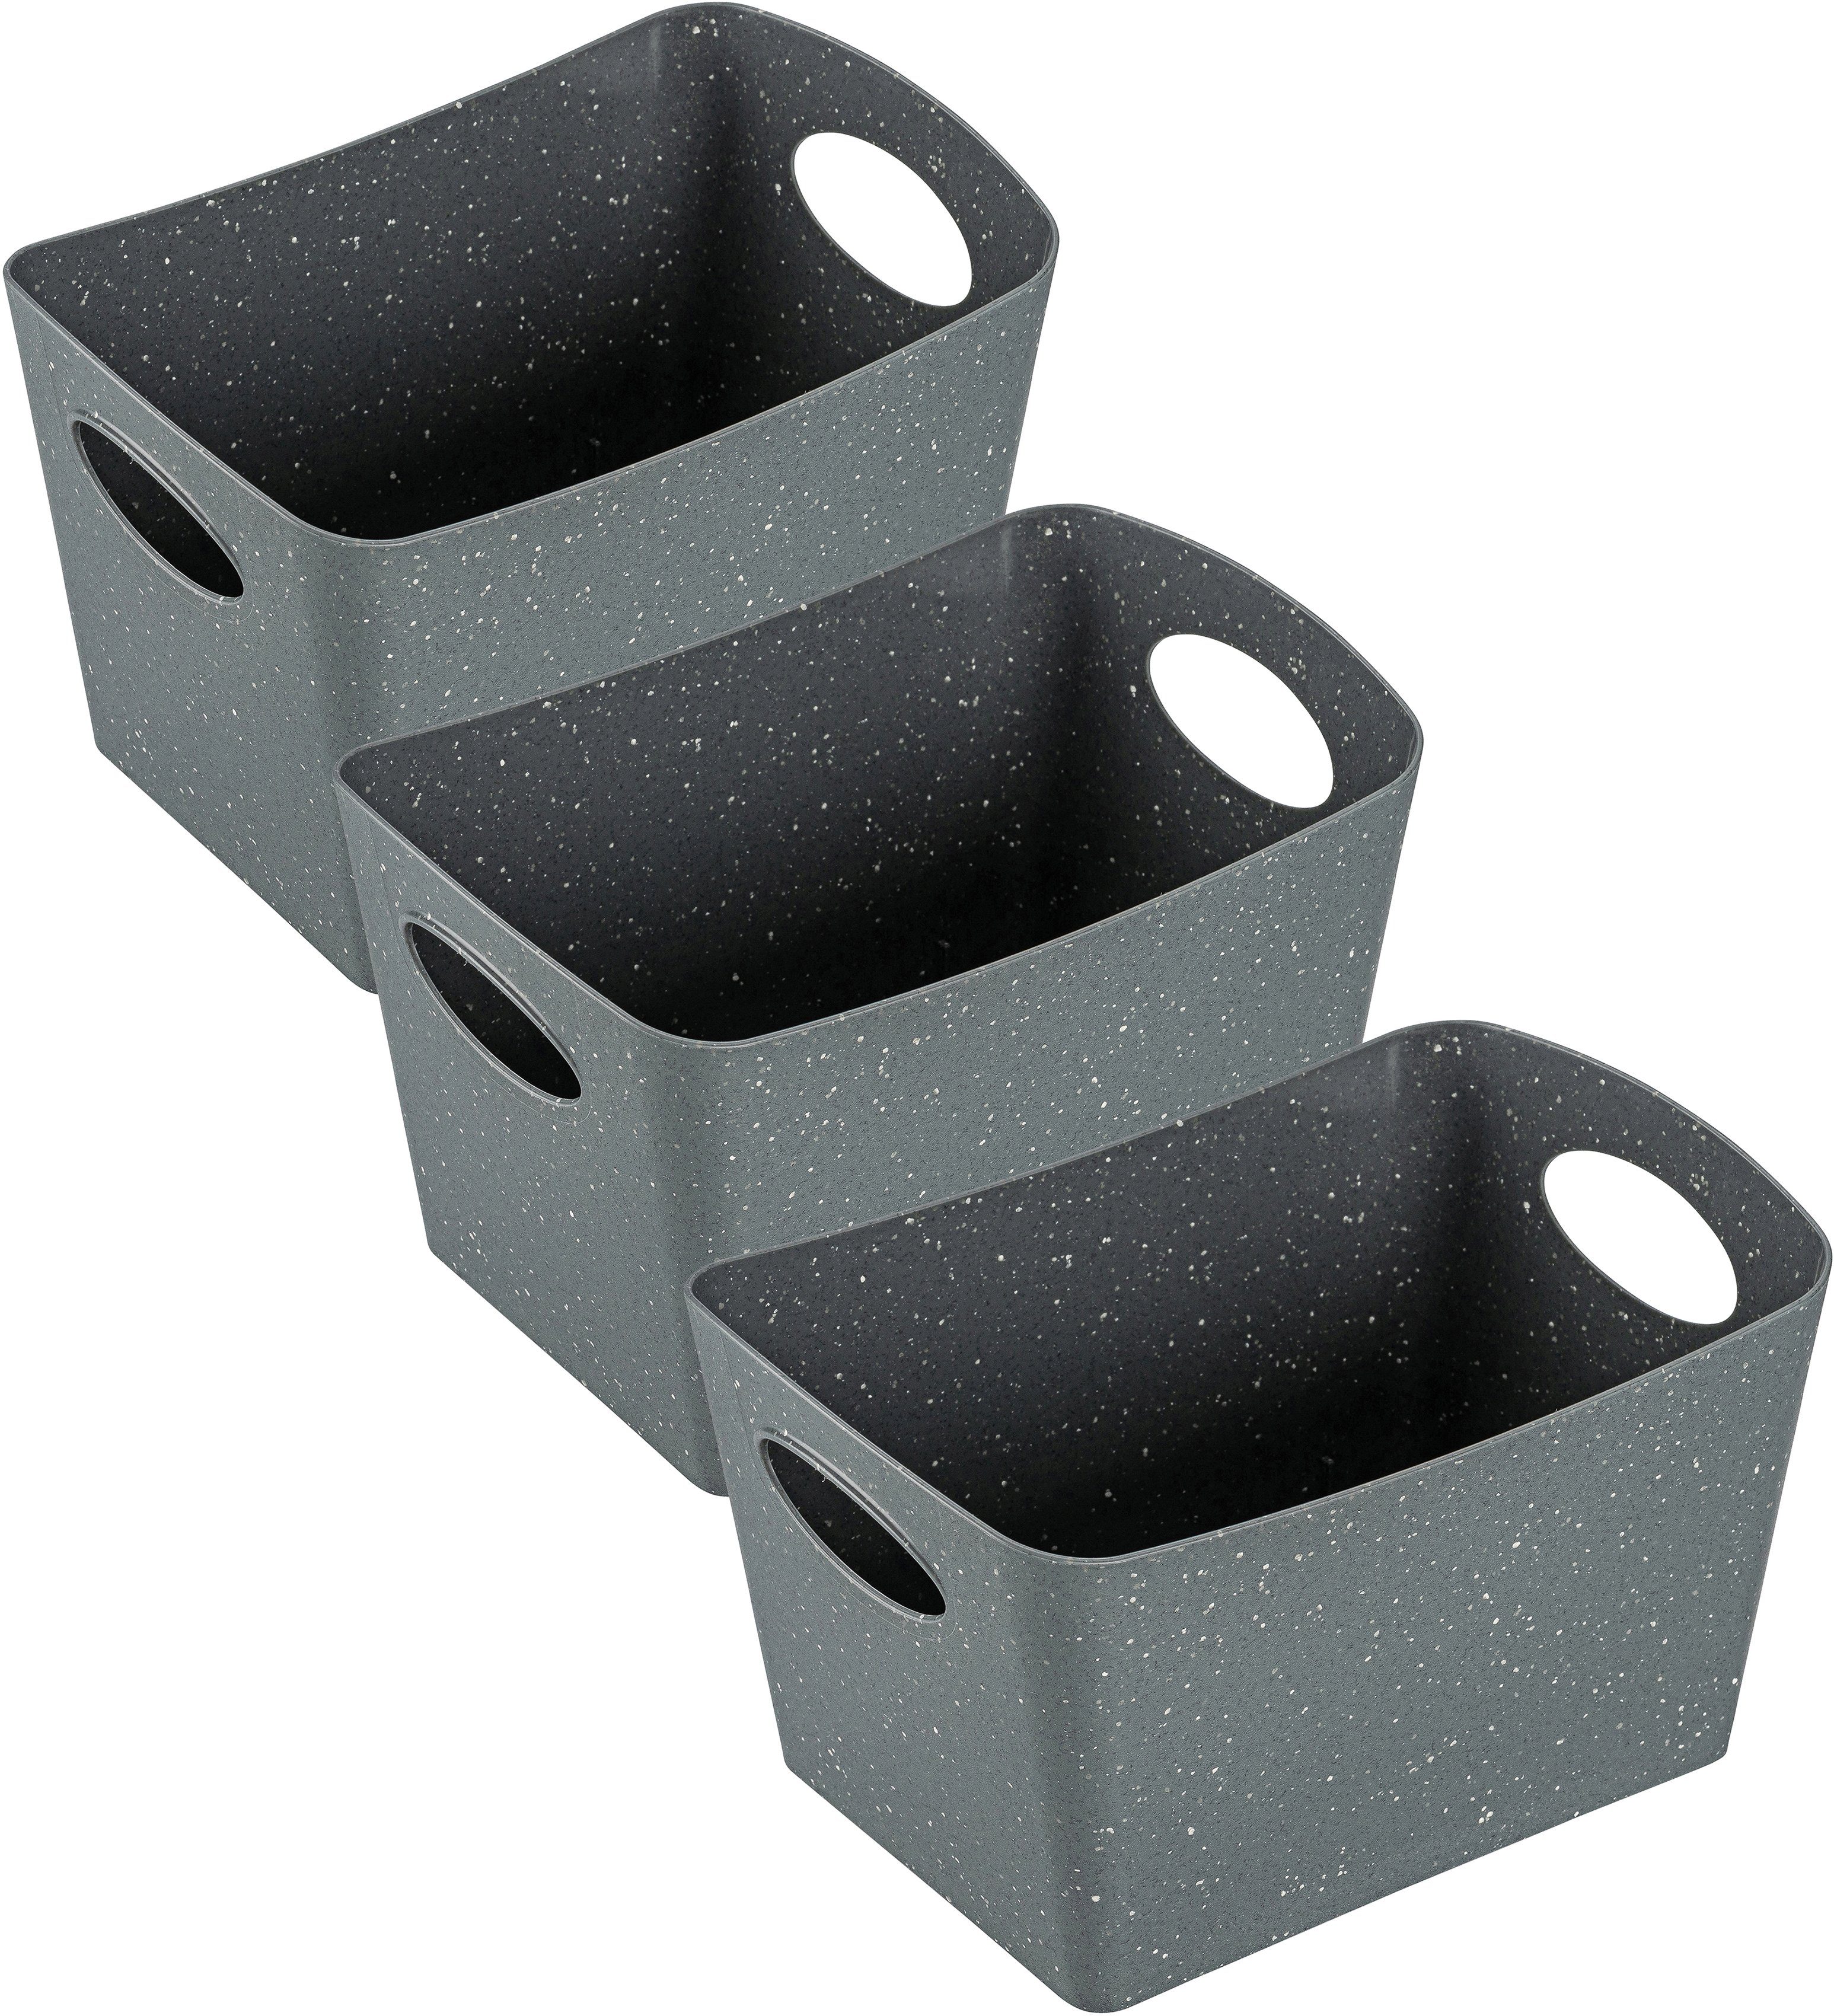 KOZIOL Organizer BOXXX S (Set, 3 St), Aufbewahrungsbox, Made in Germany, 100% recyceltes Material, 1 Liter recycled ash grey | Bad-Organizer